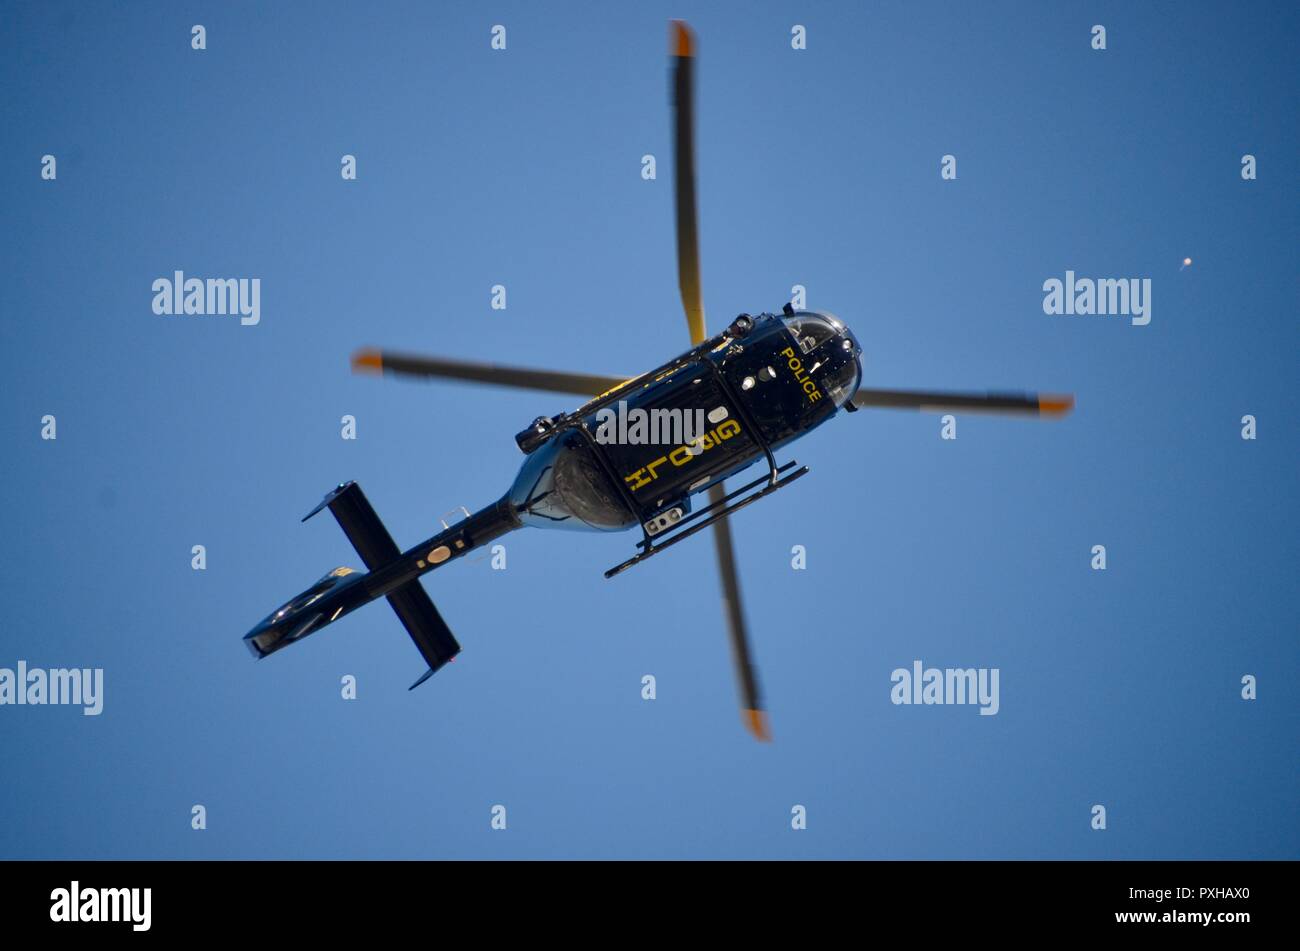 National Police Air Service eurocopter ec145 over london skies watching a demonstration Stock Photo